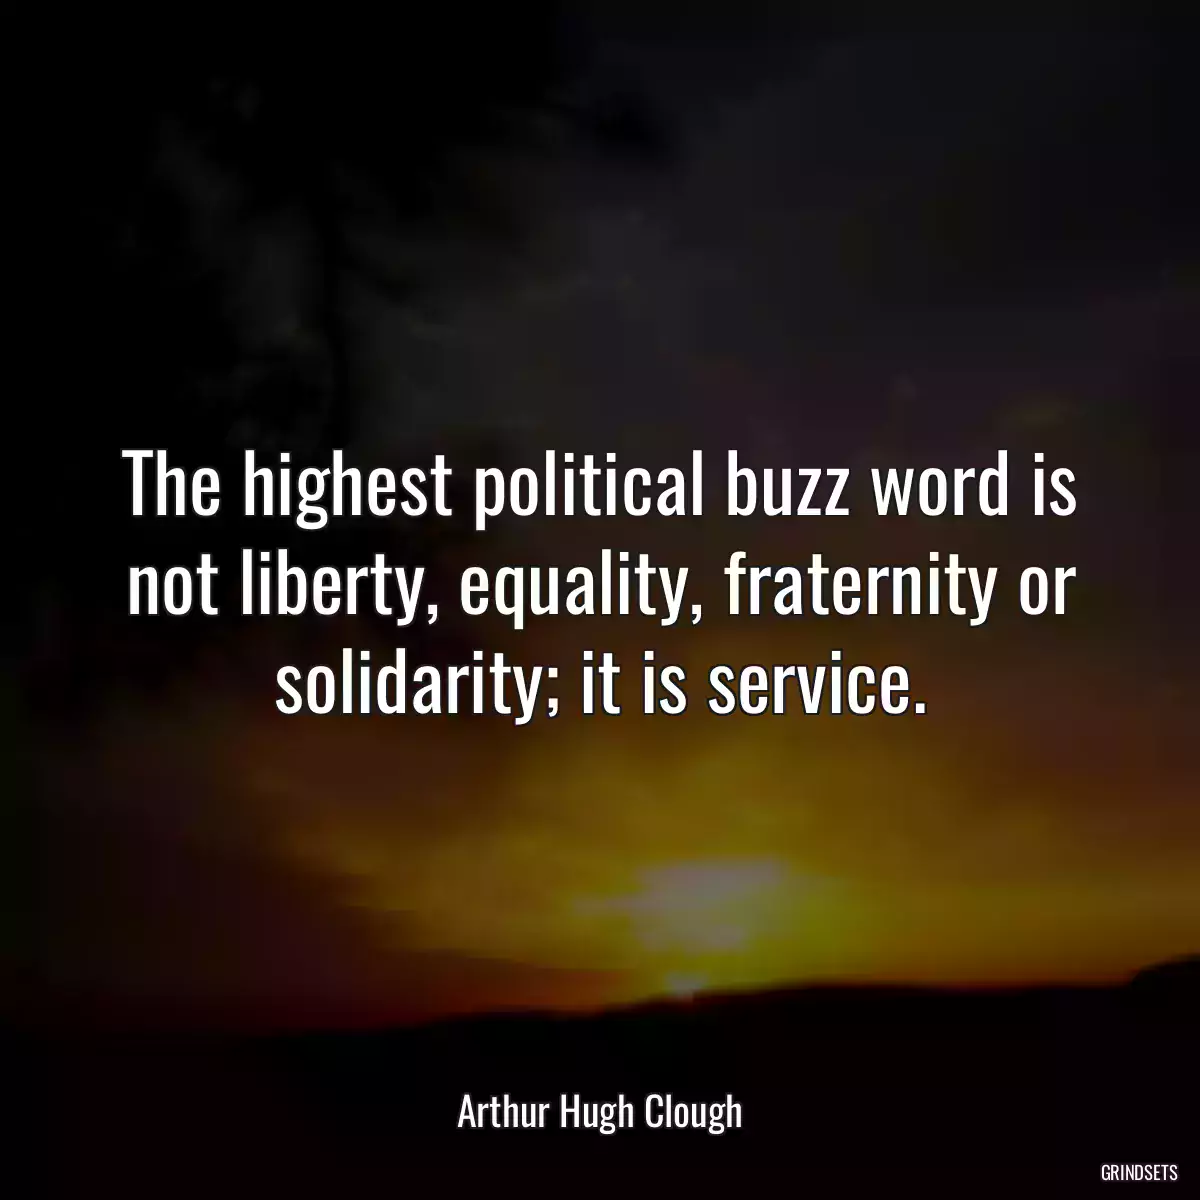 The highest political buzz word is not liberty, equality, fraternity or solidarity; it is service.